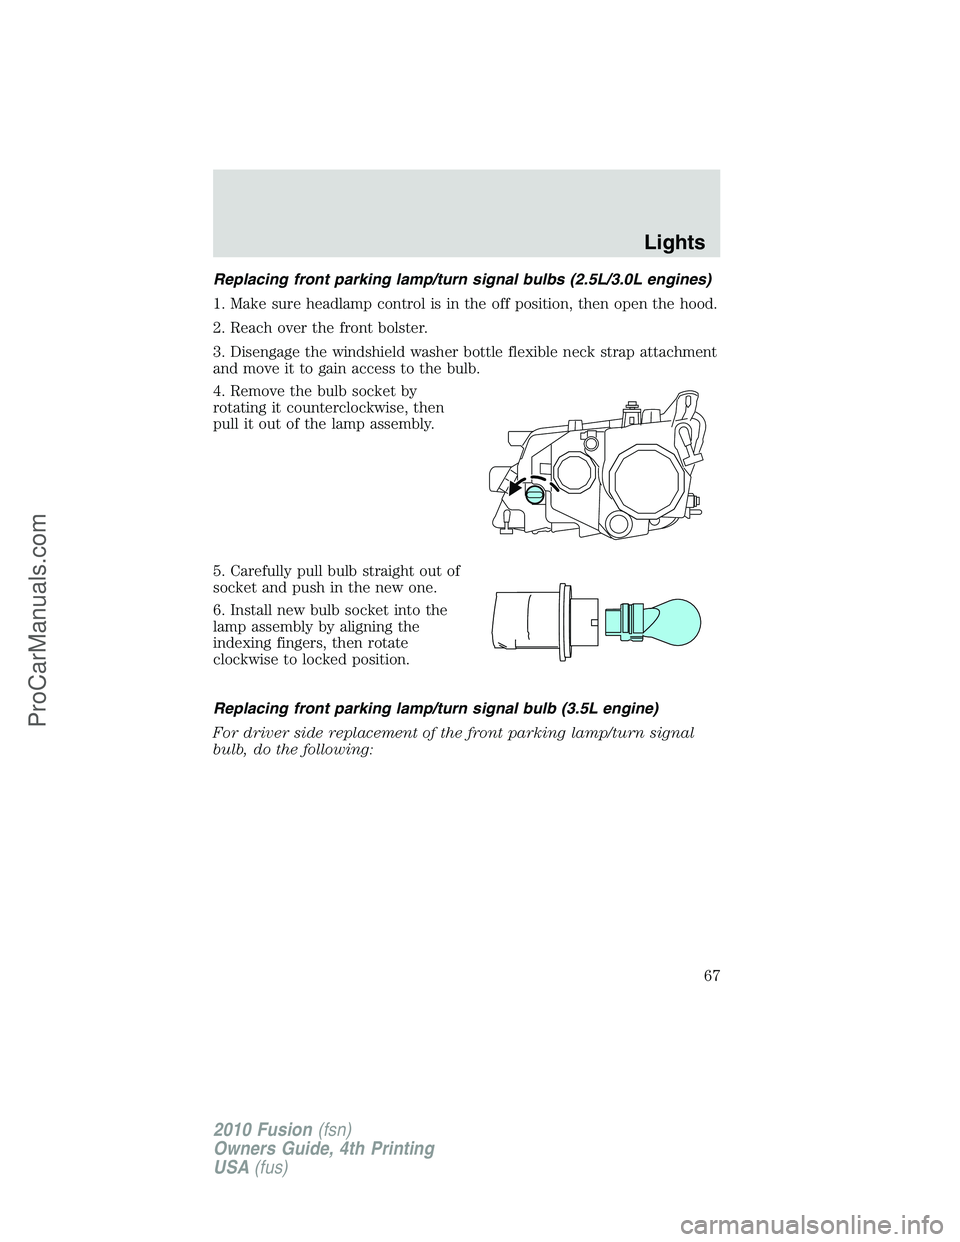 FORD FUSION 2010  Owners Manual Replacing front parking lamp/turn signal bulbs (2.5L/3.0L engines)
1. Make sure headlamp control is in the off position, then open the hood.
2. Reach over the front bolster.
3. Disengage the windshiel